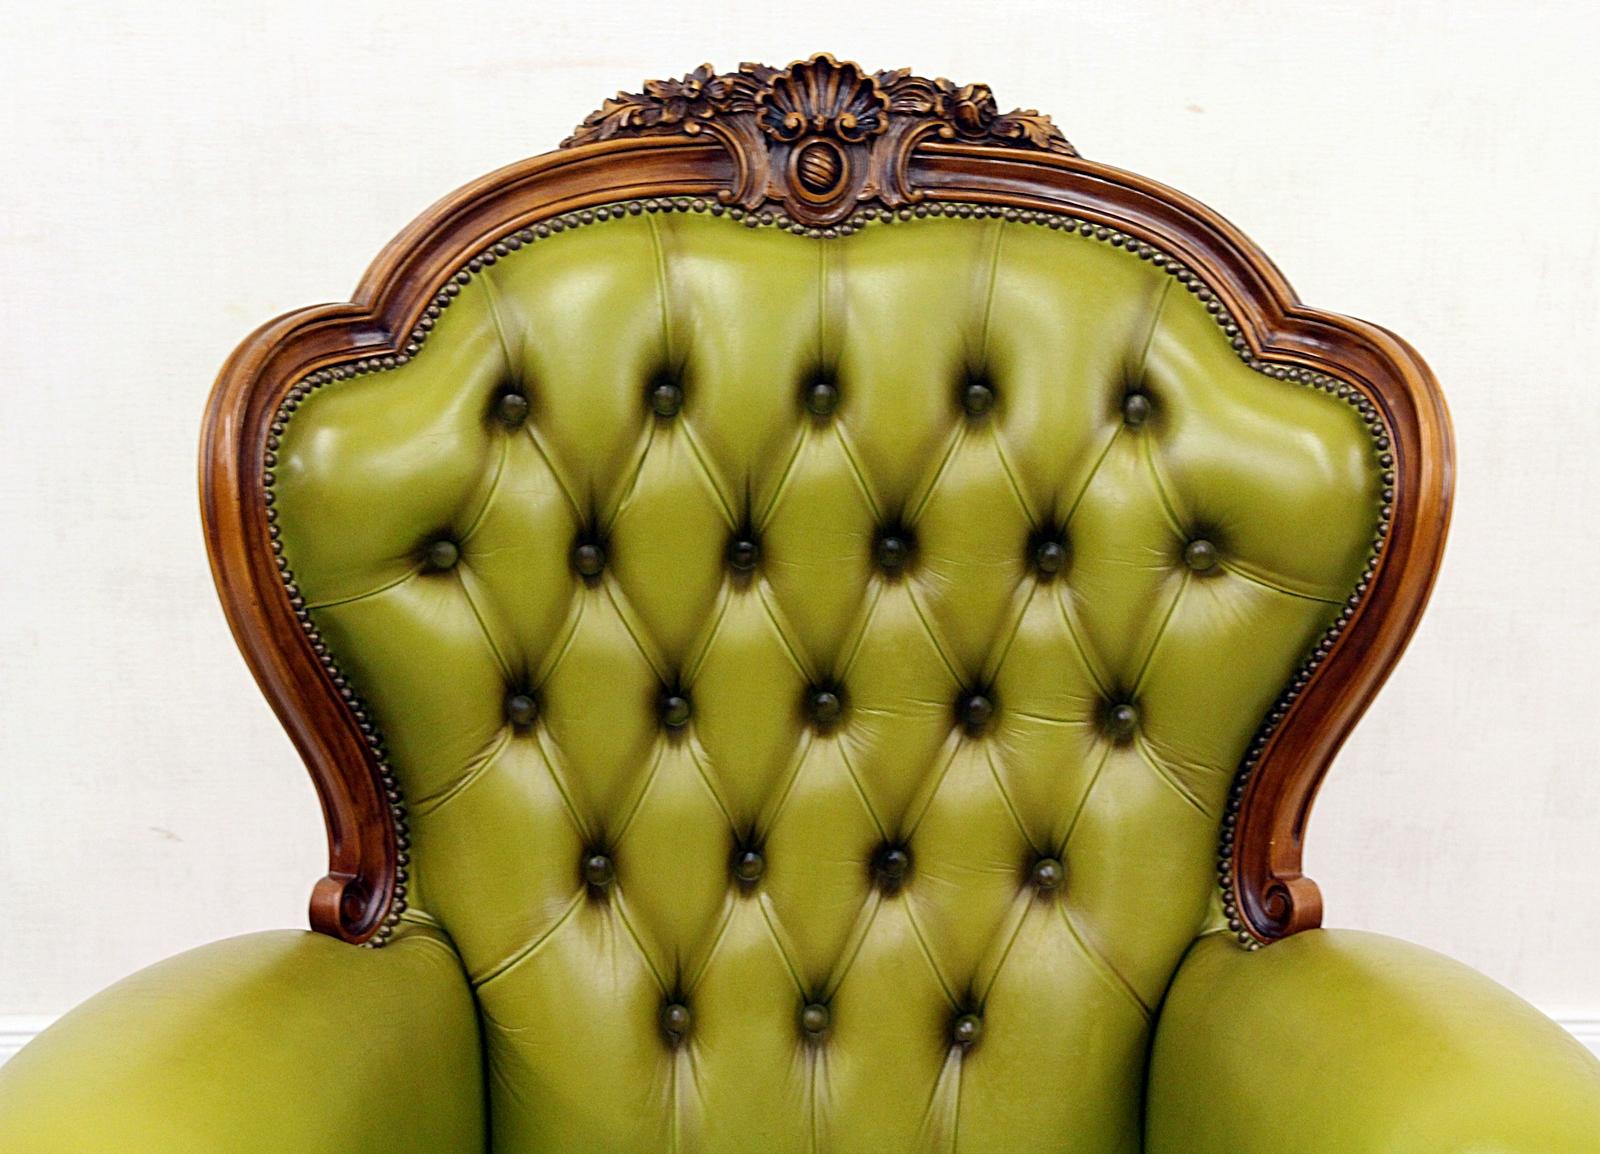 Chesterfield armchair
In original design

Condition: The chair is in a very good condition, with normal signs of wear
Armchair
Measures: Height x 108 cm width x 90 cm depth x 85 cm
Upholstery is in good condition (see photos).
Cushion: